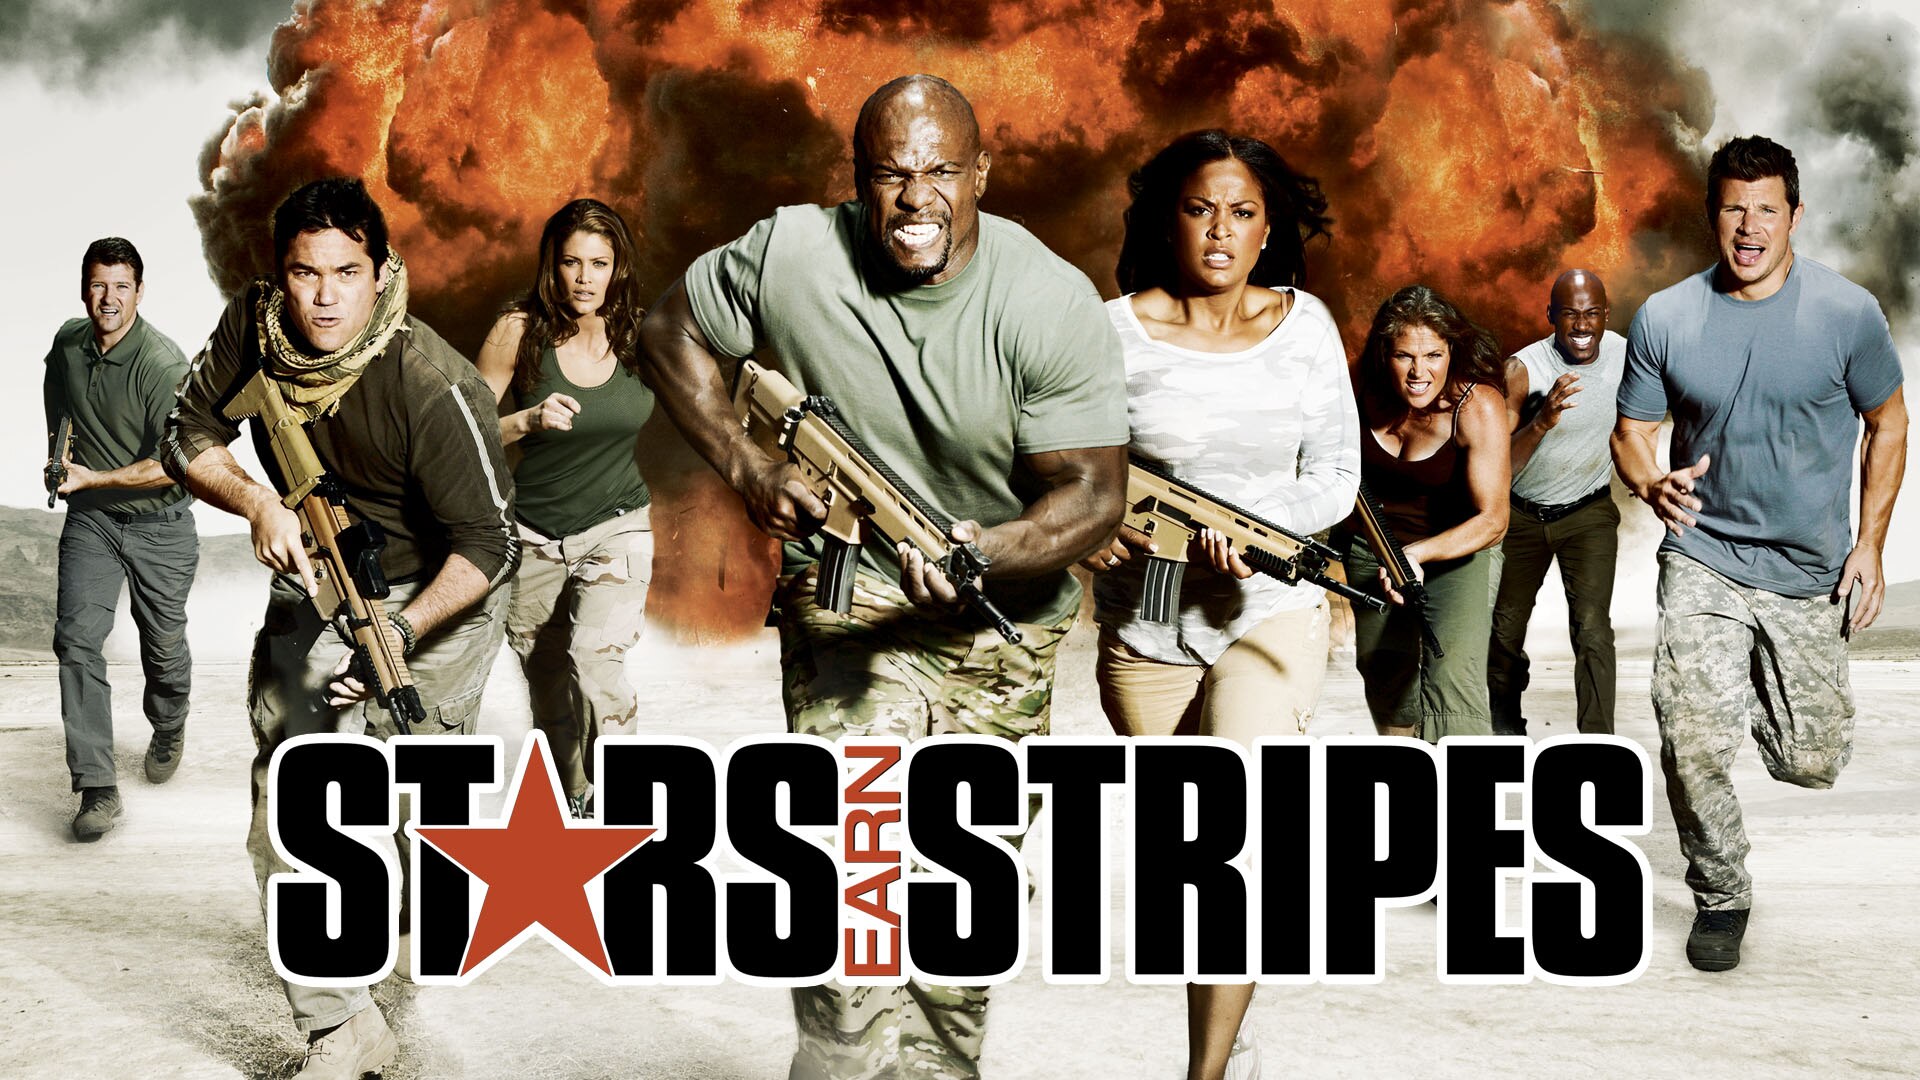 Stars Earn Stripes on FREECABLE TV